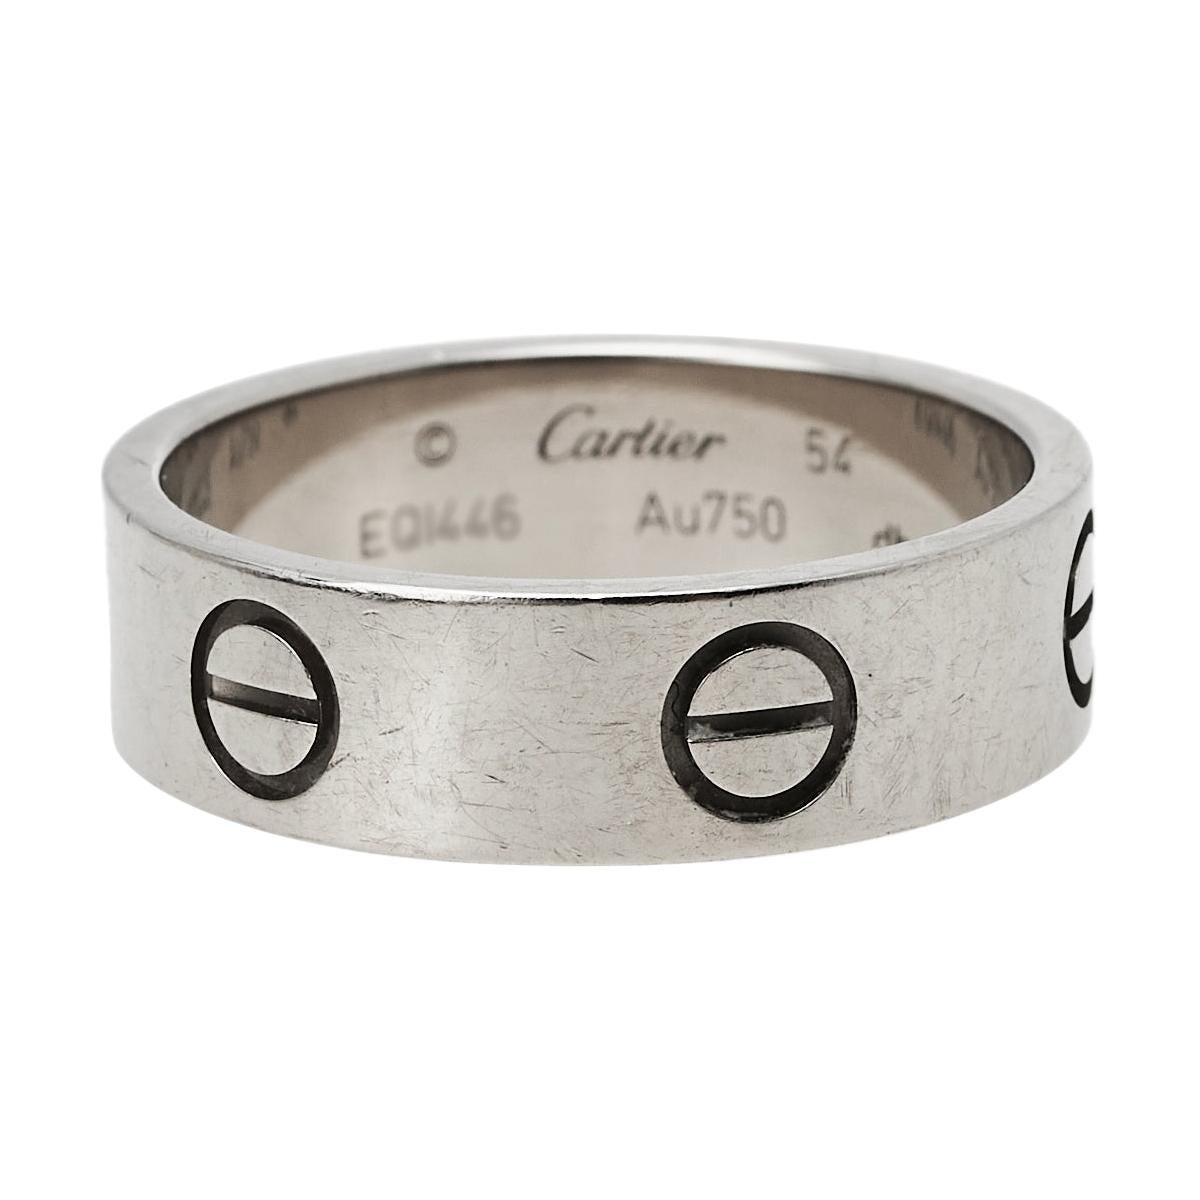 Cartier Love 18K White Gold Band Ring Size 54